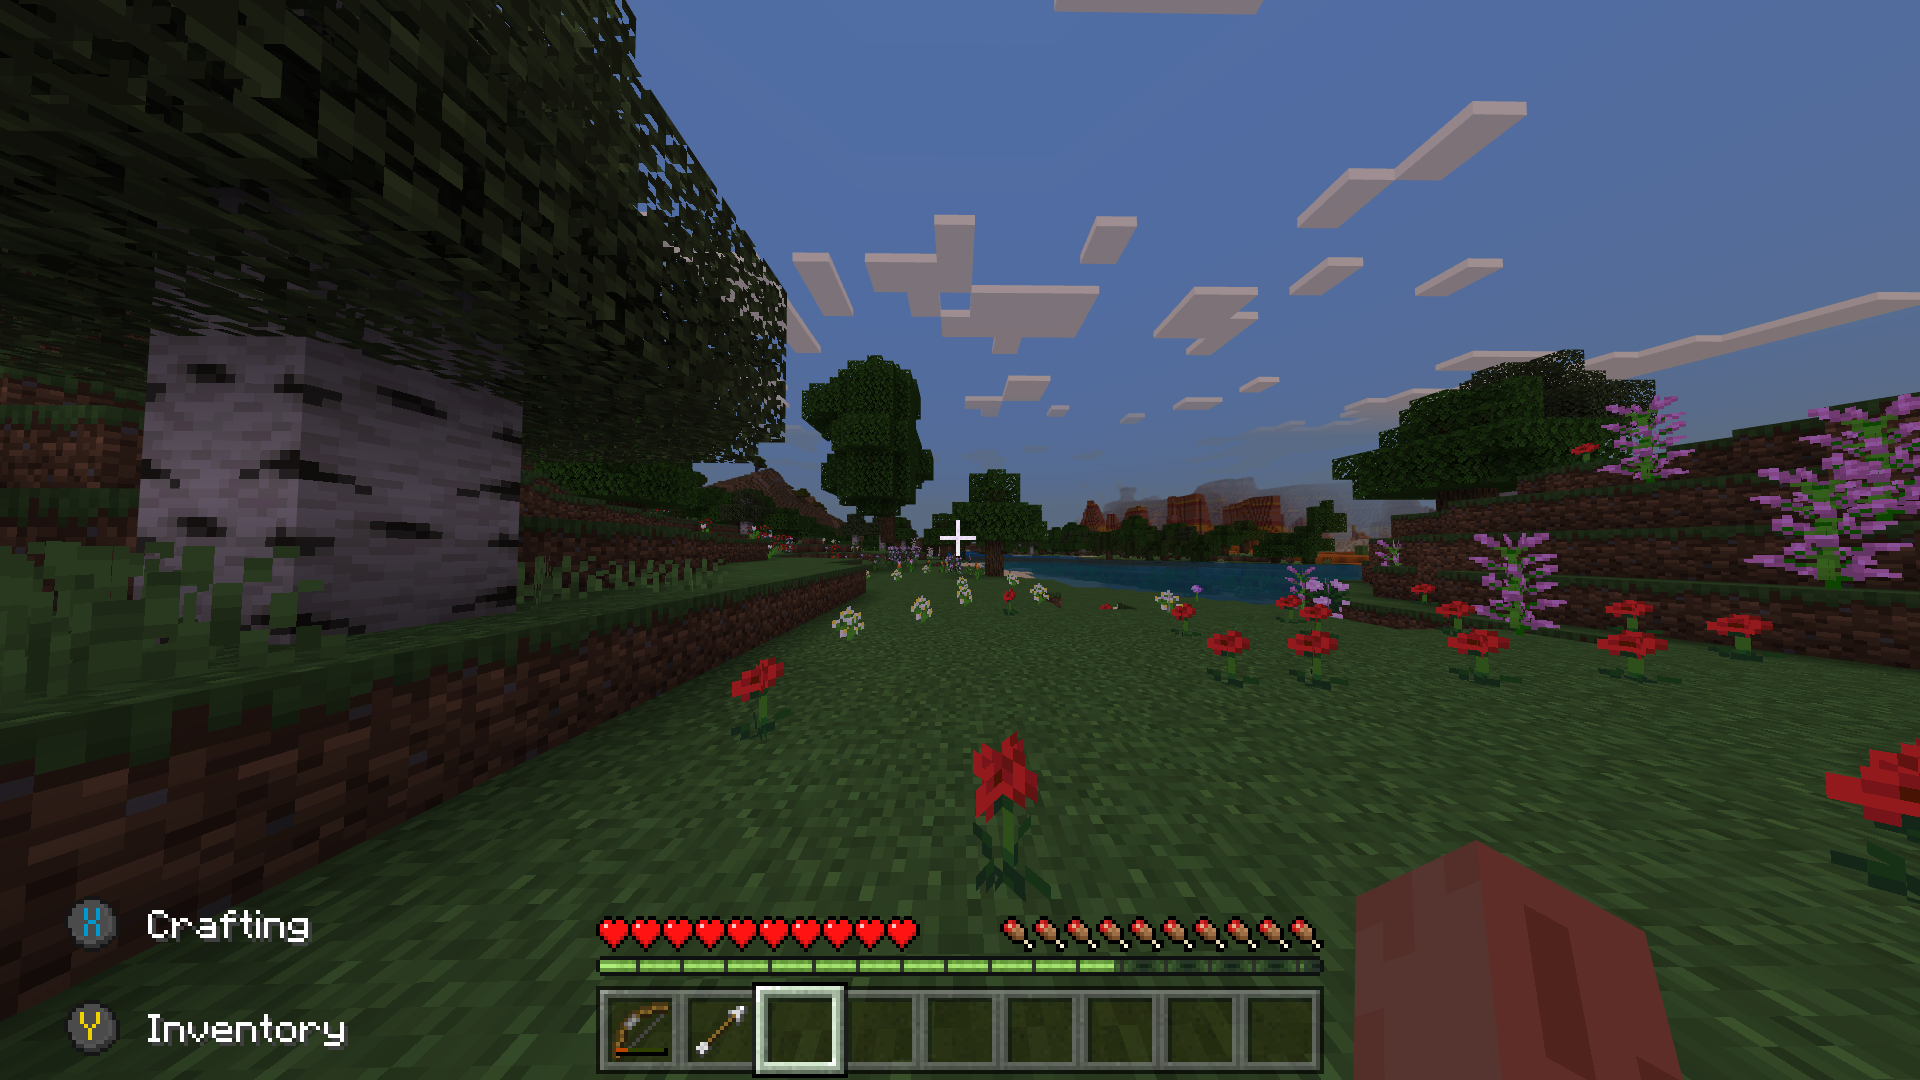 Minecraft screenshot with wide field of view creating a "fishbowl" effect stretching all things in view near edges of the screen. A tree can be seen on the left, some plants on top of a ridge to the right, and numerous red and white flowers dispersed in the middle field of view.